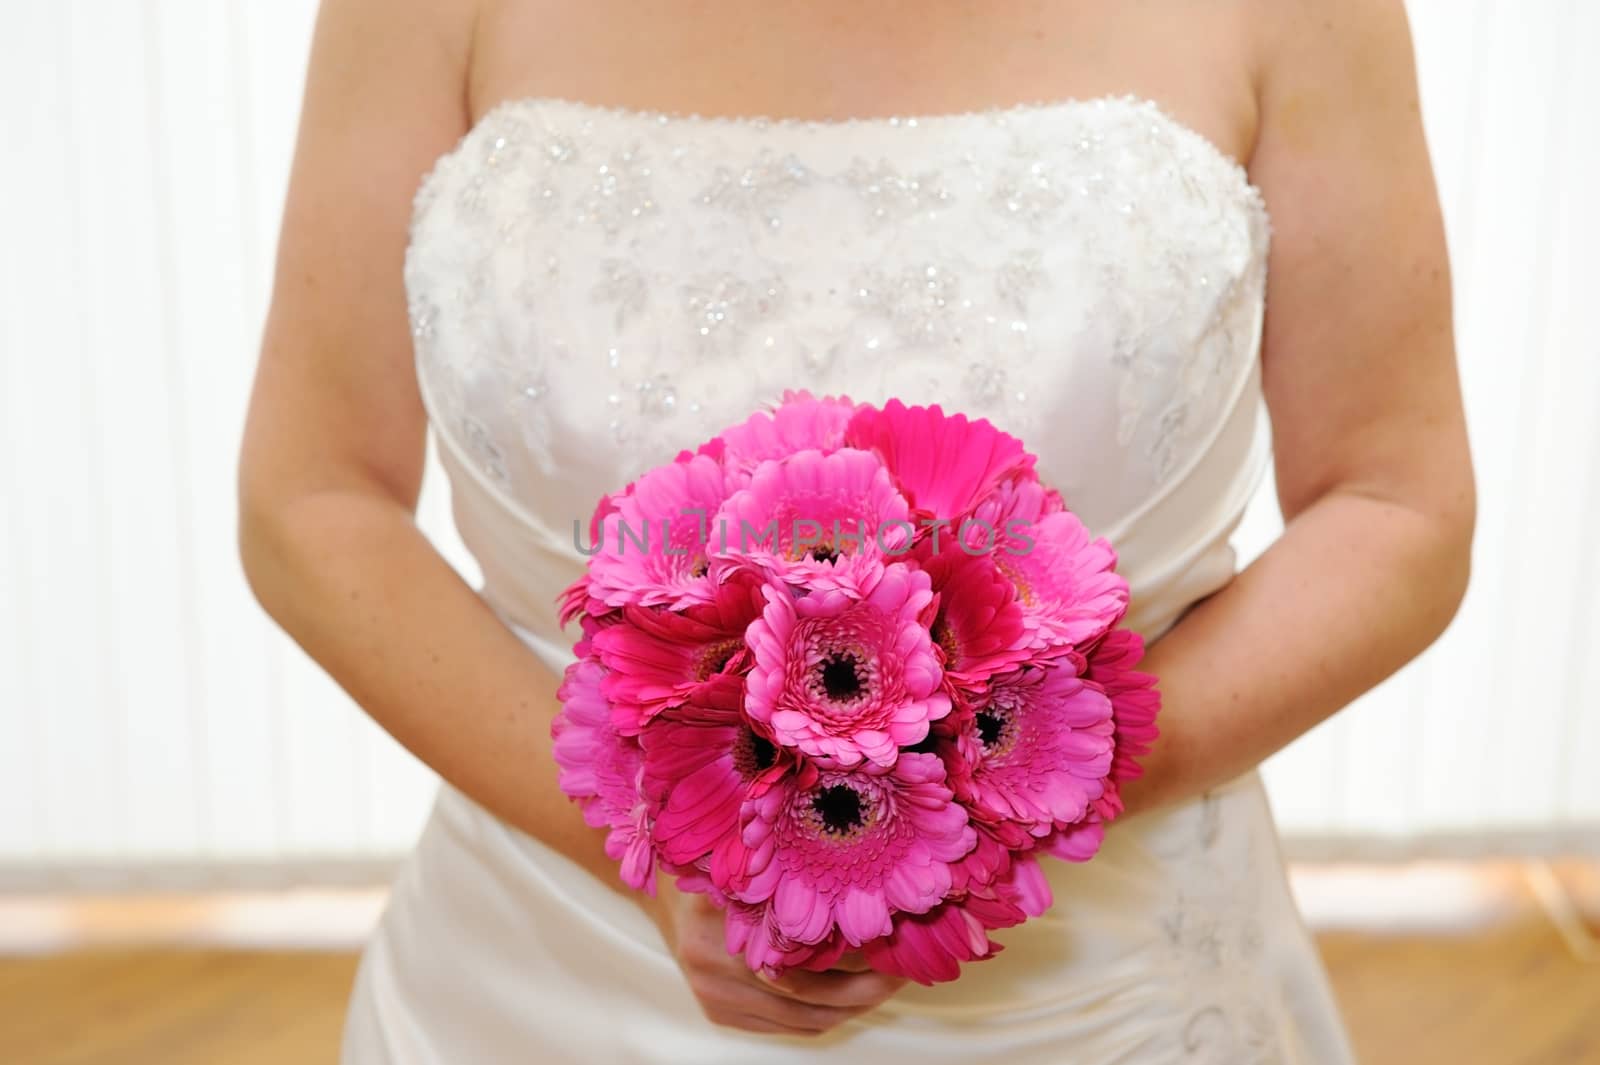 Bride holding bouquet of pink flowers before wedding